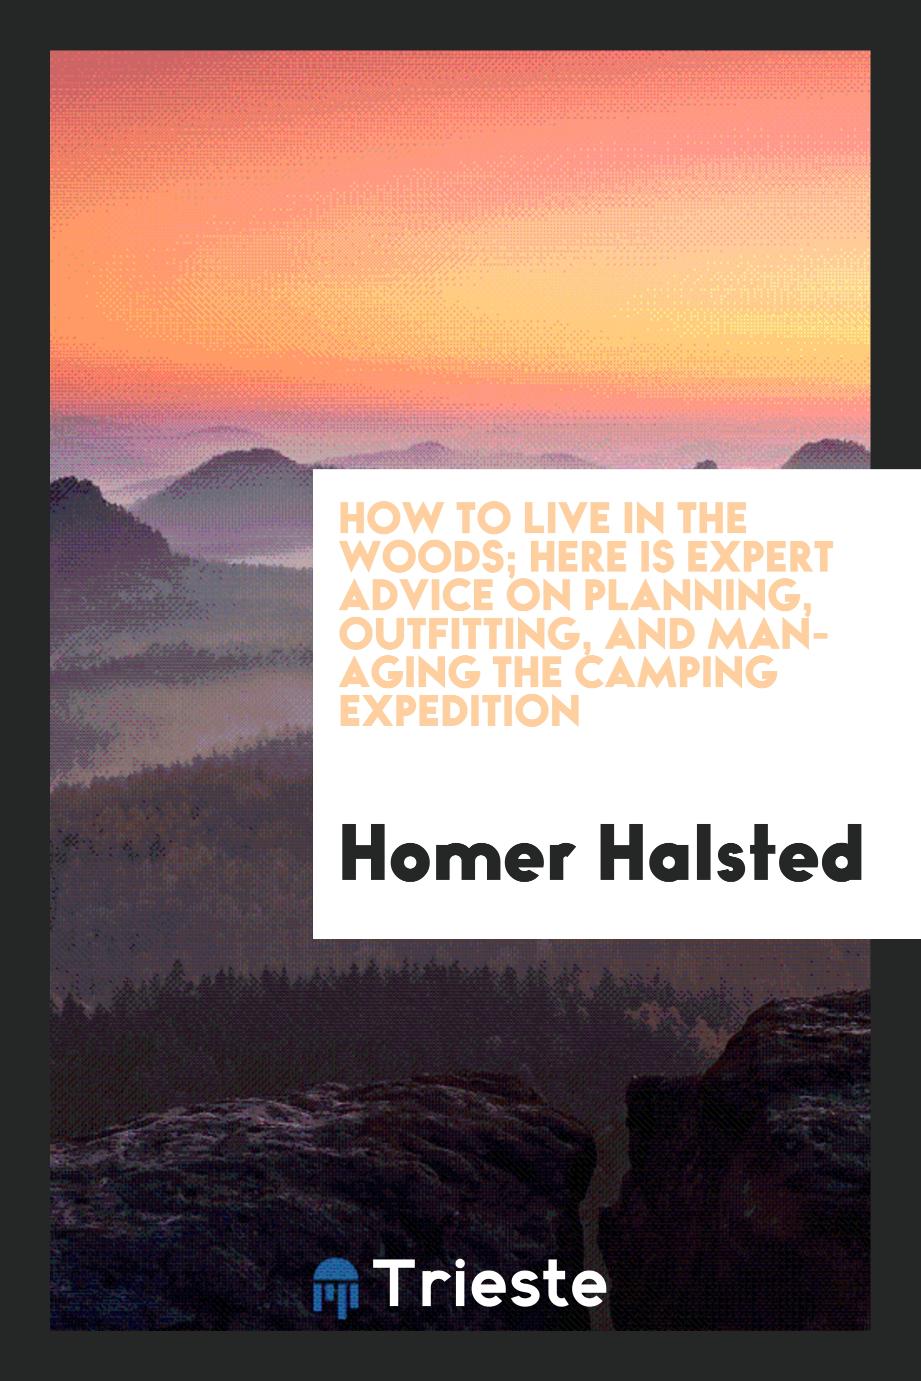 How to live in the woods; here is expert advice on planning, outfitting, and managing the camping expedition